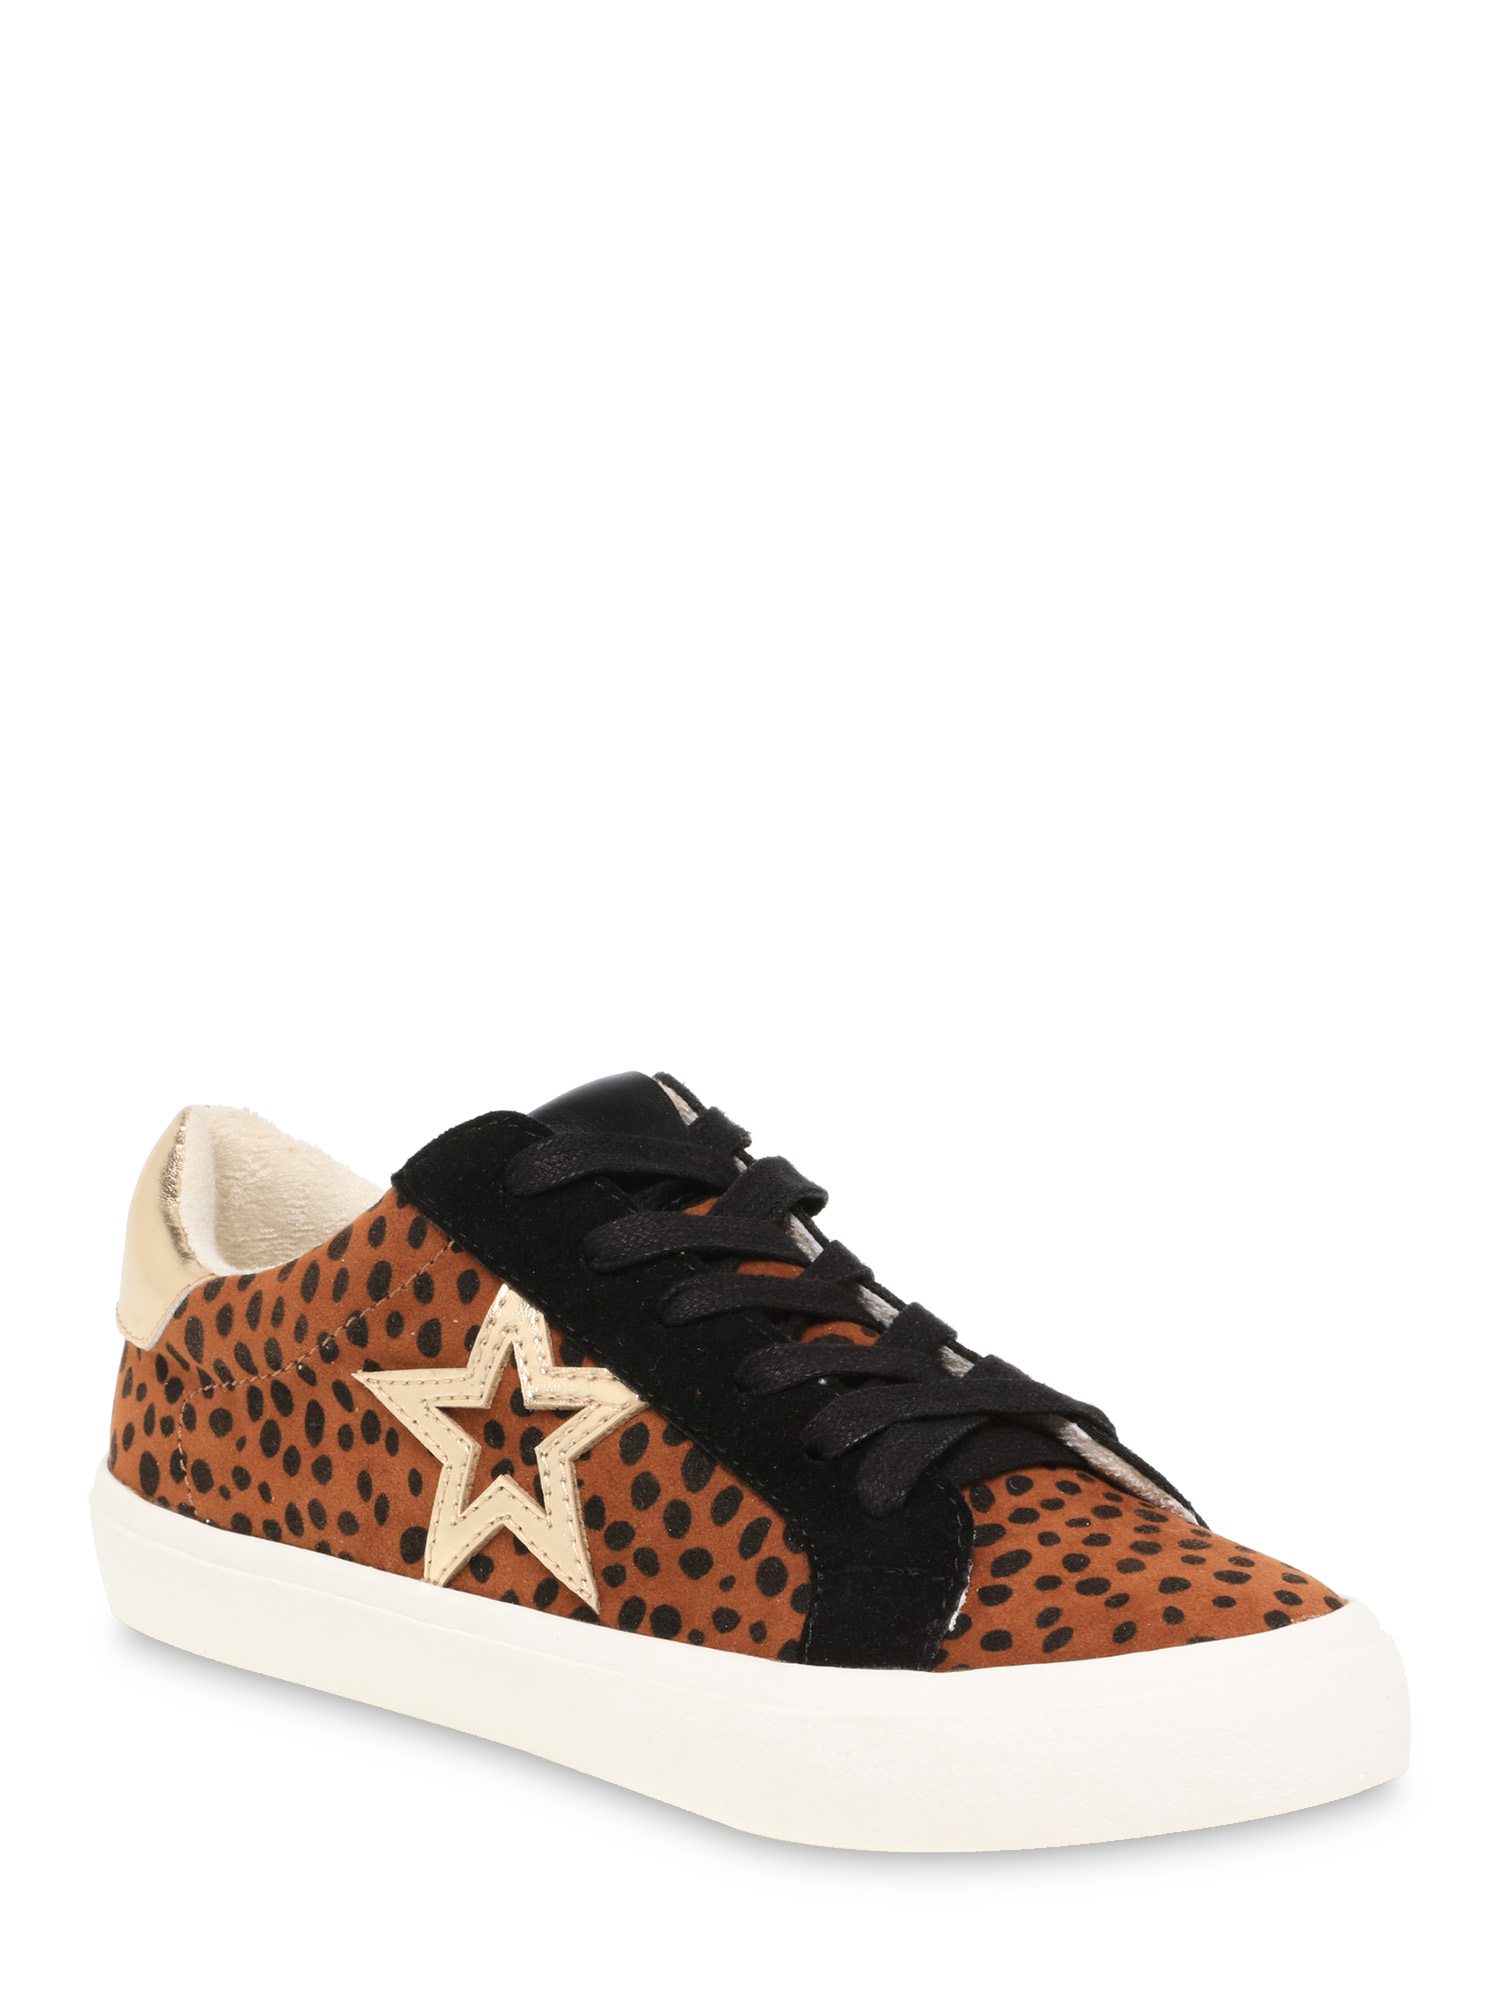 Time and Tru Women's Fashion Sneaker - image 1 of 6